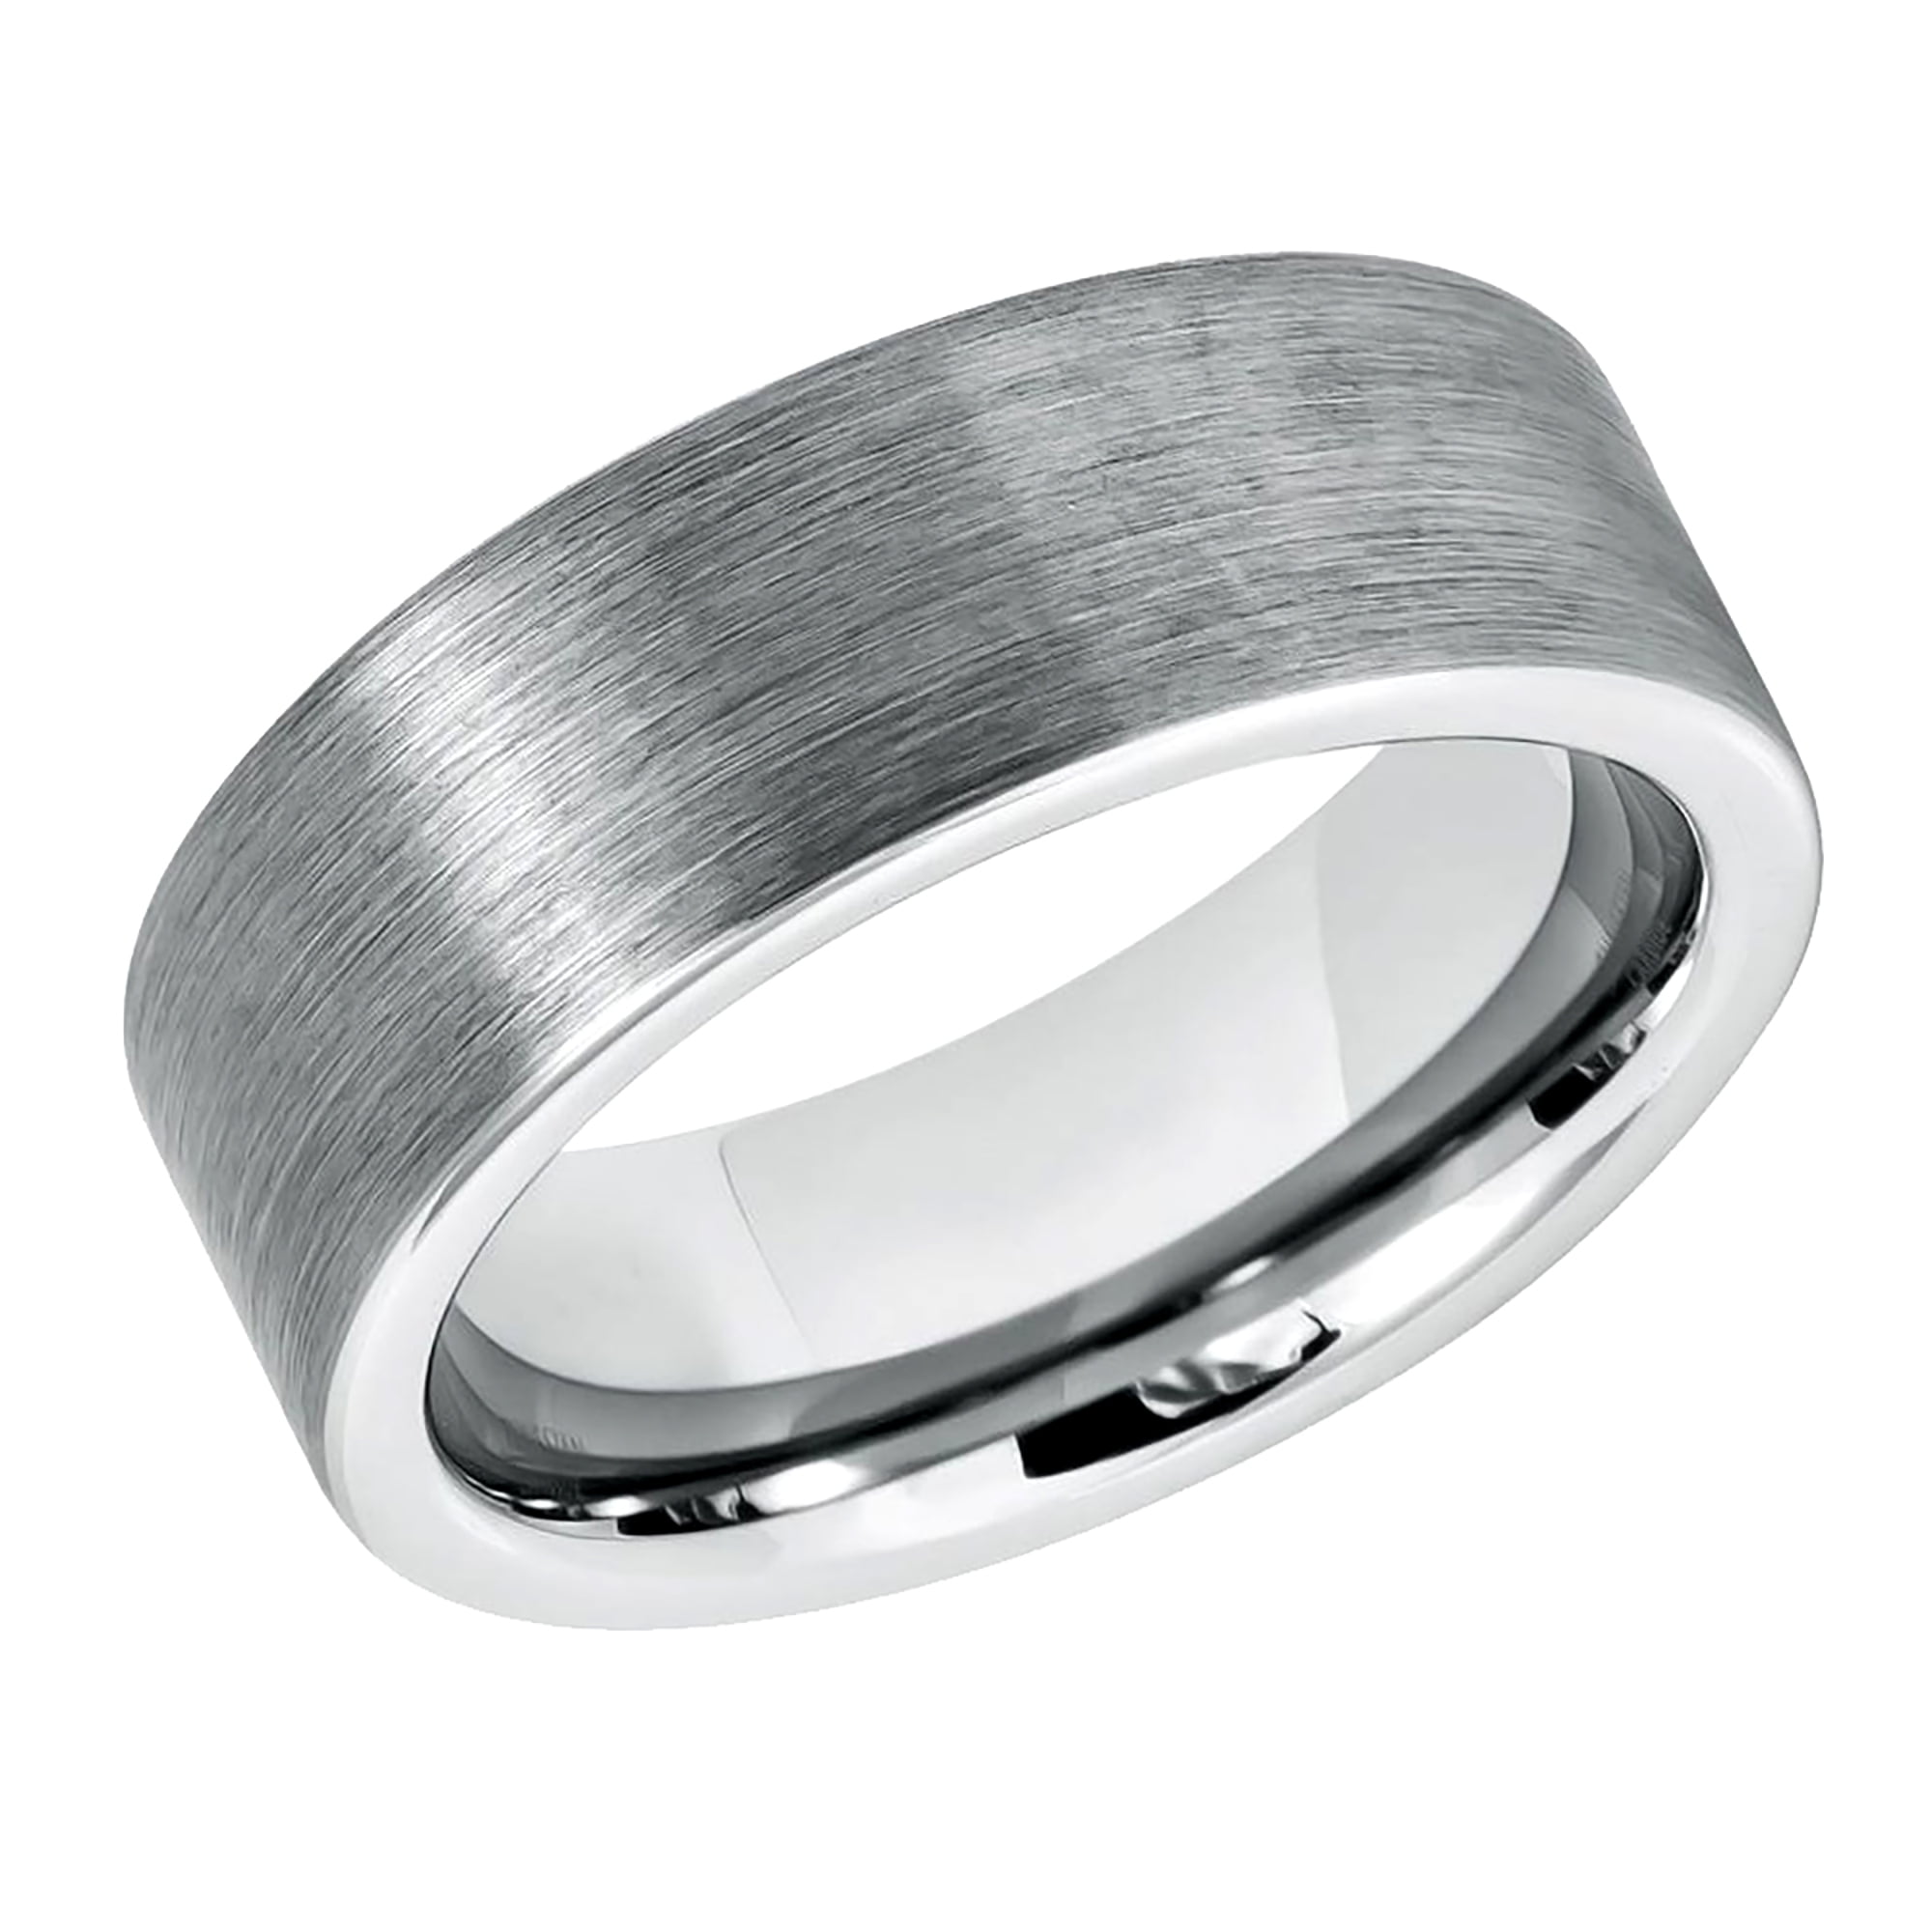 Details about   14K White Gold 2mm Ultra Lightweight Standard Fit Flat Band Ring Size 12.0 